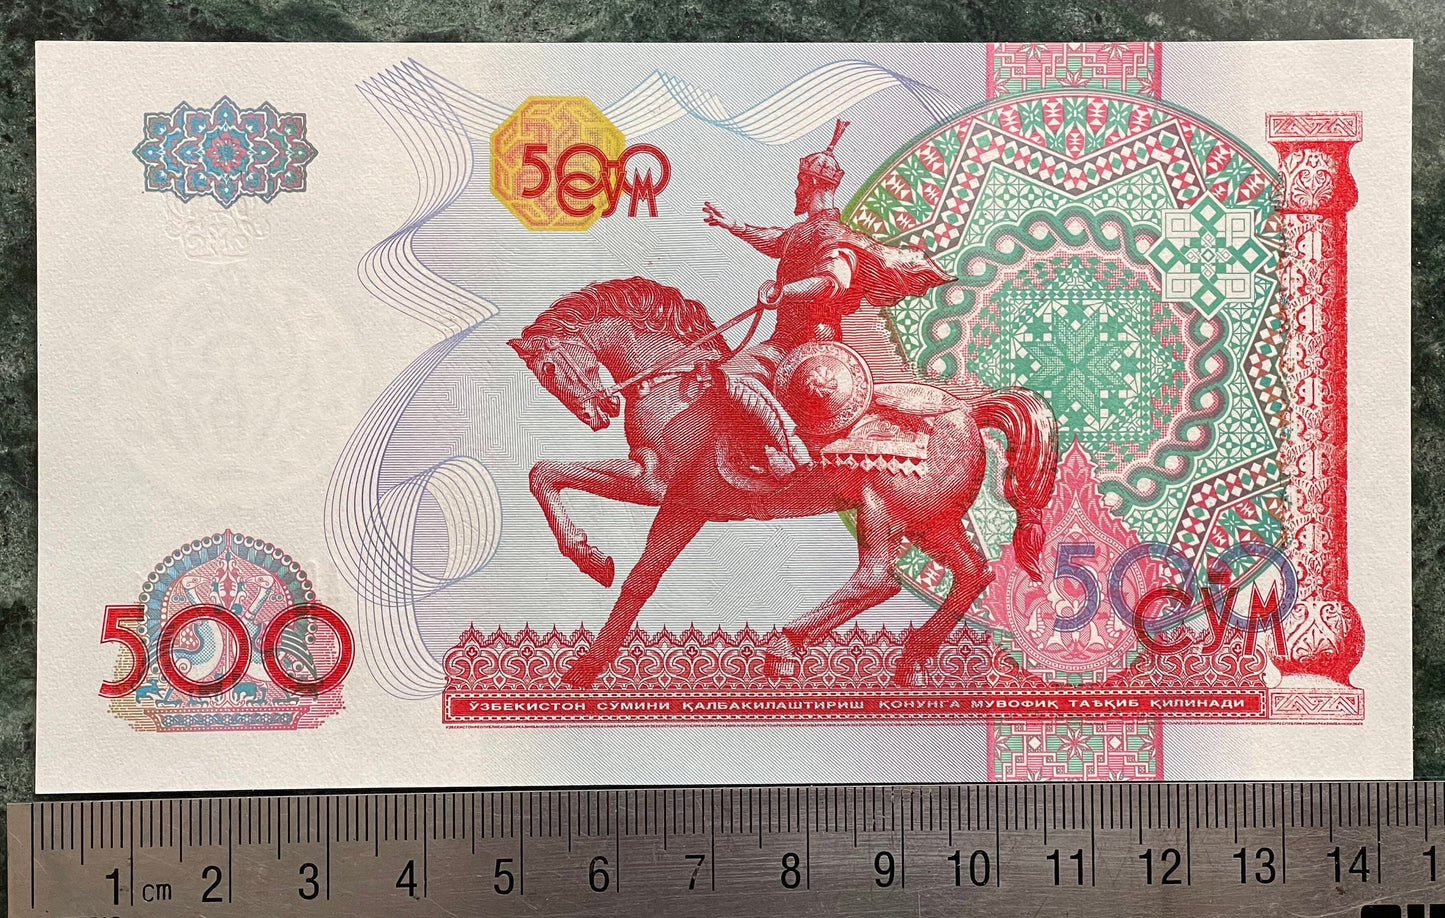 Tamerlane on Horseback 500 S'om Uzbekistan Authentic Banknote Money for Jewelry and Collage (1999) (Ghazi) (Equestrian Statue) (Amir Timur)